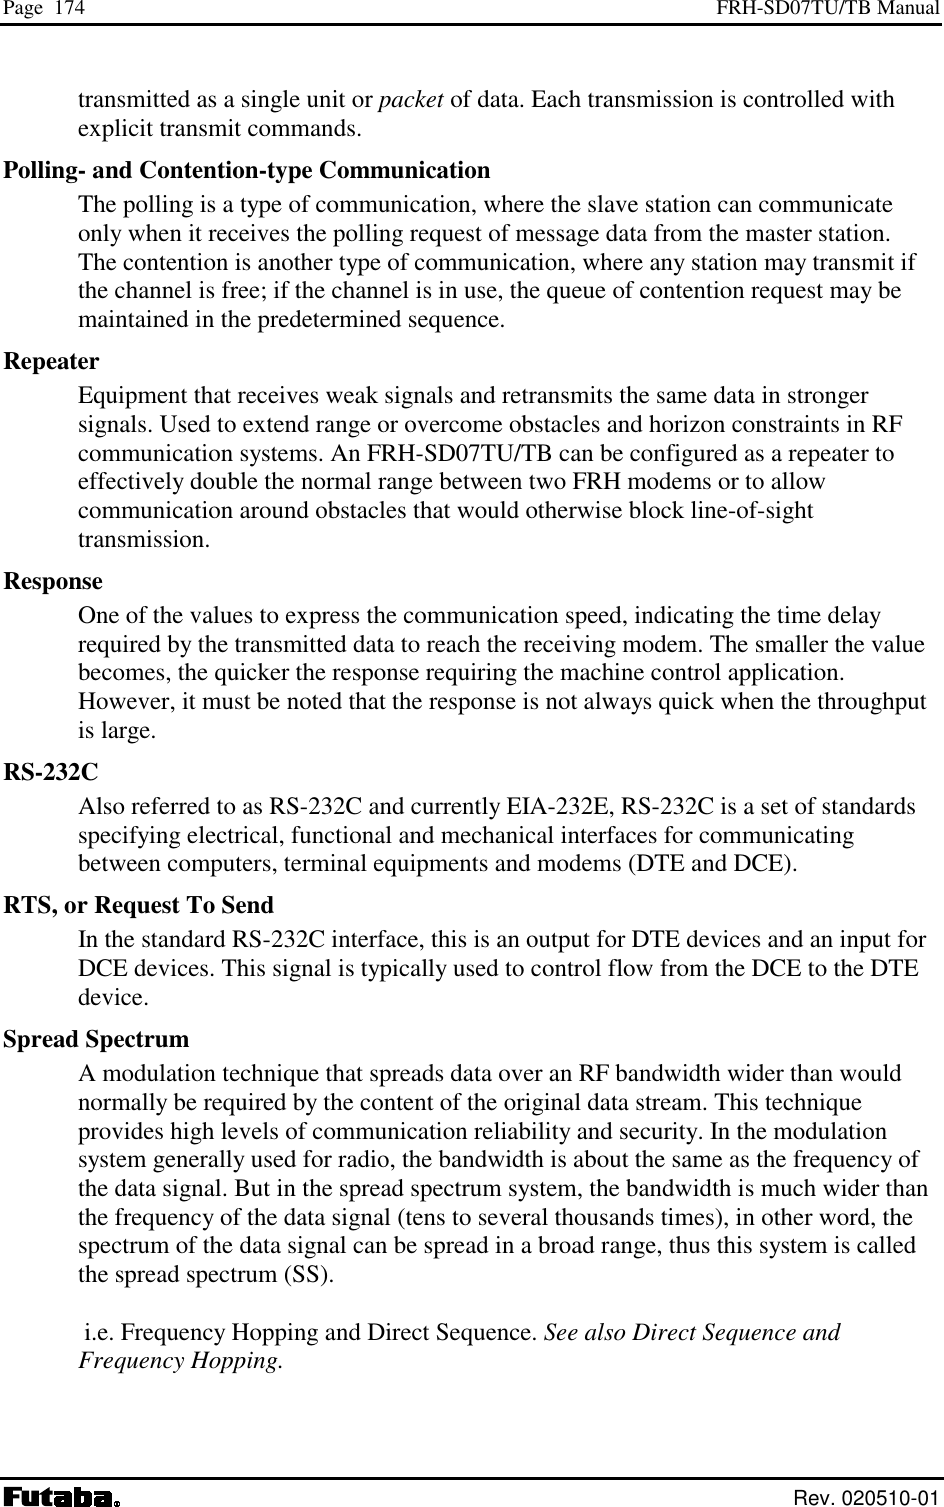 Page  174  FRH-SD07TU/TB Manual  Rev. 020510-01 transmitted as a single unit or packet of data. Each transmission is controlled with explicit transmit commands. Polling- and Contention-type Communication The polling is a type of communication, where the slave station can communicate only when it receives the polling request of message data from the master station.  The contention is another type of communication, where any station may transmit if the channel is free; if the channel is in use, the queue of contention request may be maintained in the predetermined sequence. Repeater Equipment that receives weak signals and retransmits the same data in stronger signals. Used to extend range or overcome obstacles and horizon constraints in RF communication systems. An FRH-SD07TU/TB can be configured as a repeater to effectively double the normal range between two FRH modems or to allow communication around obstacles that would otherwise block line-of-sight transmission. Response One of the values to express the communication speed, indicating the time delay required by the transmitted data to reach the receiving modem. The smaller the value becomes, the quicker the response requiring the machine control application. However, it must be noted that the response is not always quick when the throughput is large. RS-232C Also referred to as RS-232C and currently EIA-232E, RS-232C is a set of standards specifying electrical, functional and mechanical interfaces for communicating between computers, terminal equipments and modems (DTE and DCE). RTS, or Request To Send In the standard RS-232C interface, this is an output for DTE devices and an input for DCE devices. This signal is typically used to control flow from the DCE to the DTE device. Spread Spectrum A modulation technique that spreads data over an RF bandwidth wider than would normally be required by the content of the original data stream. This technique provides high levels of communication reliability and security. In the modulation system generally used for radio, the bandwidth is about the same as the frequency of the data signal. But in the spread spectrum system, the bandwidth is much wider than the frequency of the data signal (tens to several thousands times), in other word, the spectrum of the data signal can be spread in a broad range, thus this system is called the spread spectrum (SS).   i.e. Frequency Hopping and Direct Sequence. See also Direct Sequence and Frequency Hopping.  